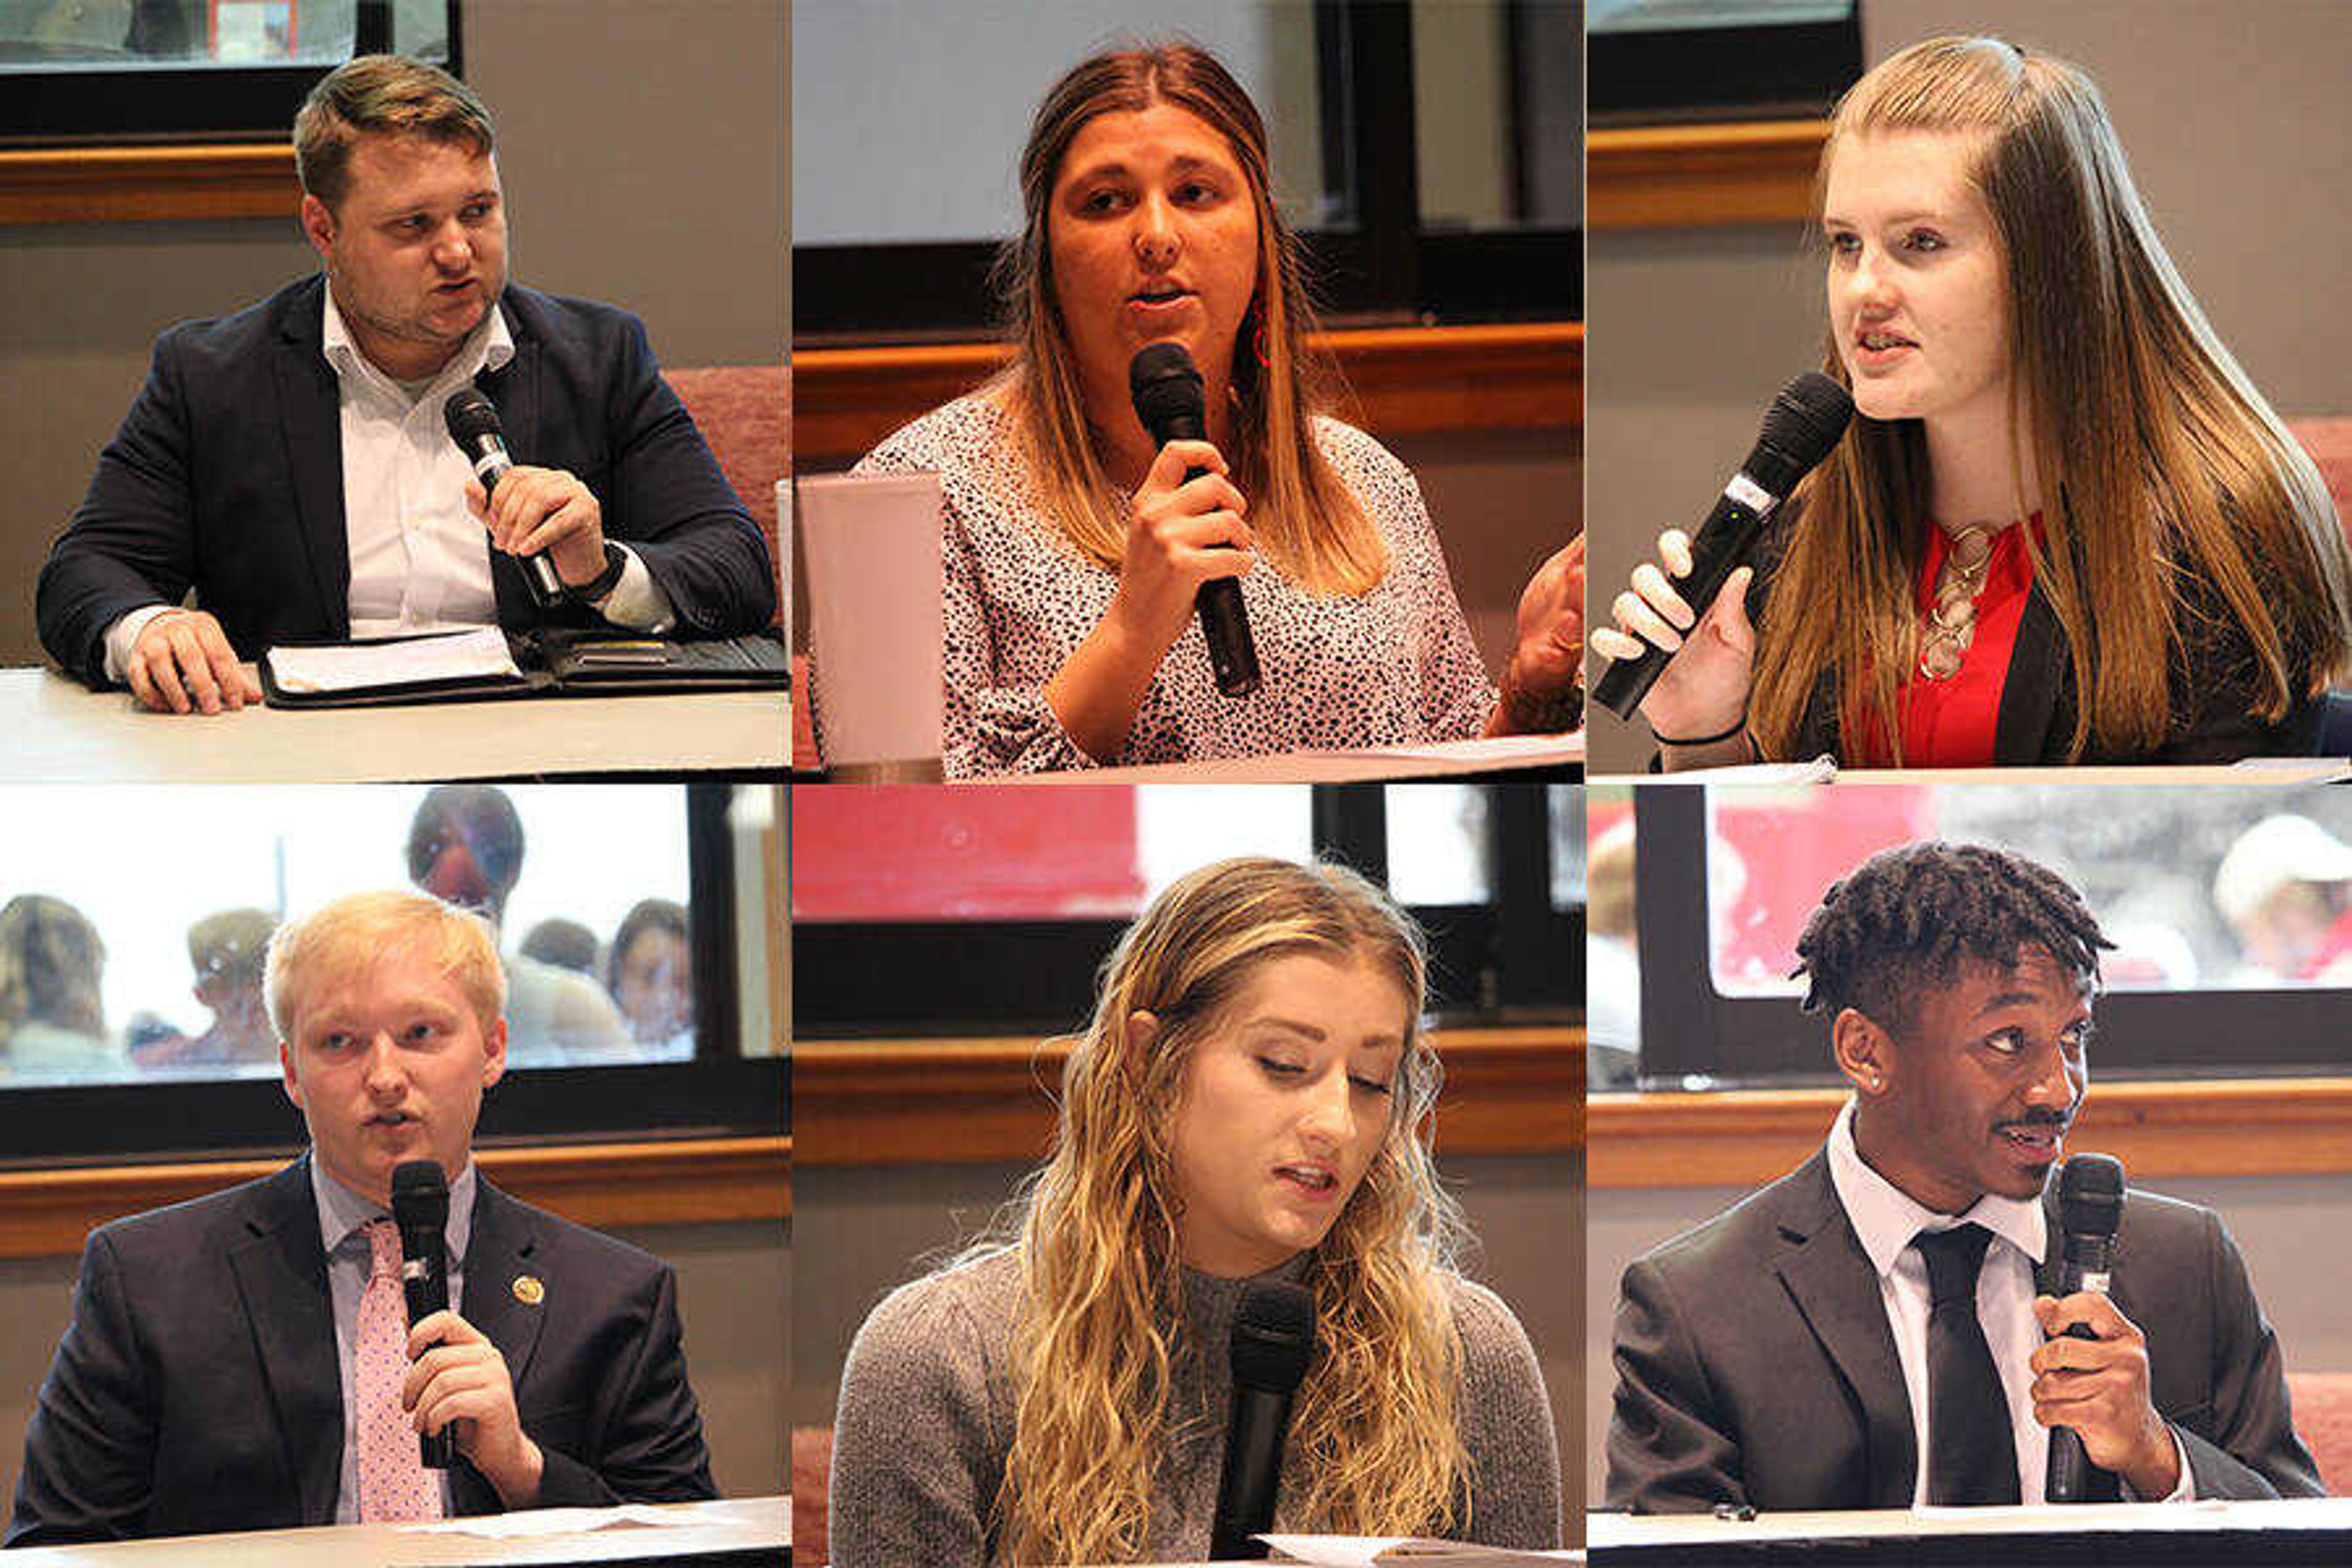 [Top: Left to Right] Ignite Innovation presidential candidate Joel Philpott, vice presidential candidate Natalie Augustyn and treasurer candidate Heather Hoffman speak at the SGA debate on March 30. [Bottom: Left to Right] The SEMO Experience presidential candidate Luke Collins, vice presidential candidate Sophie Machen and treasurer candidate Tyrell Gilwater speak at the SGA debate on March 30.